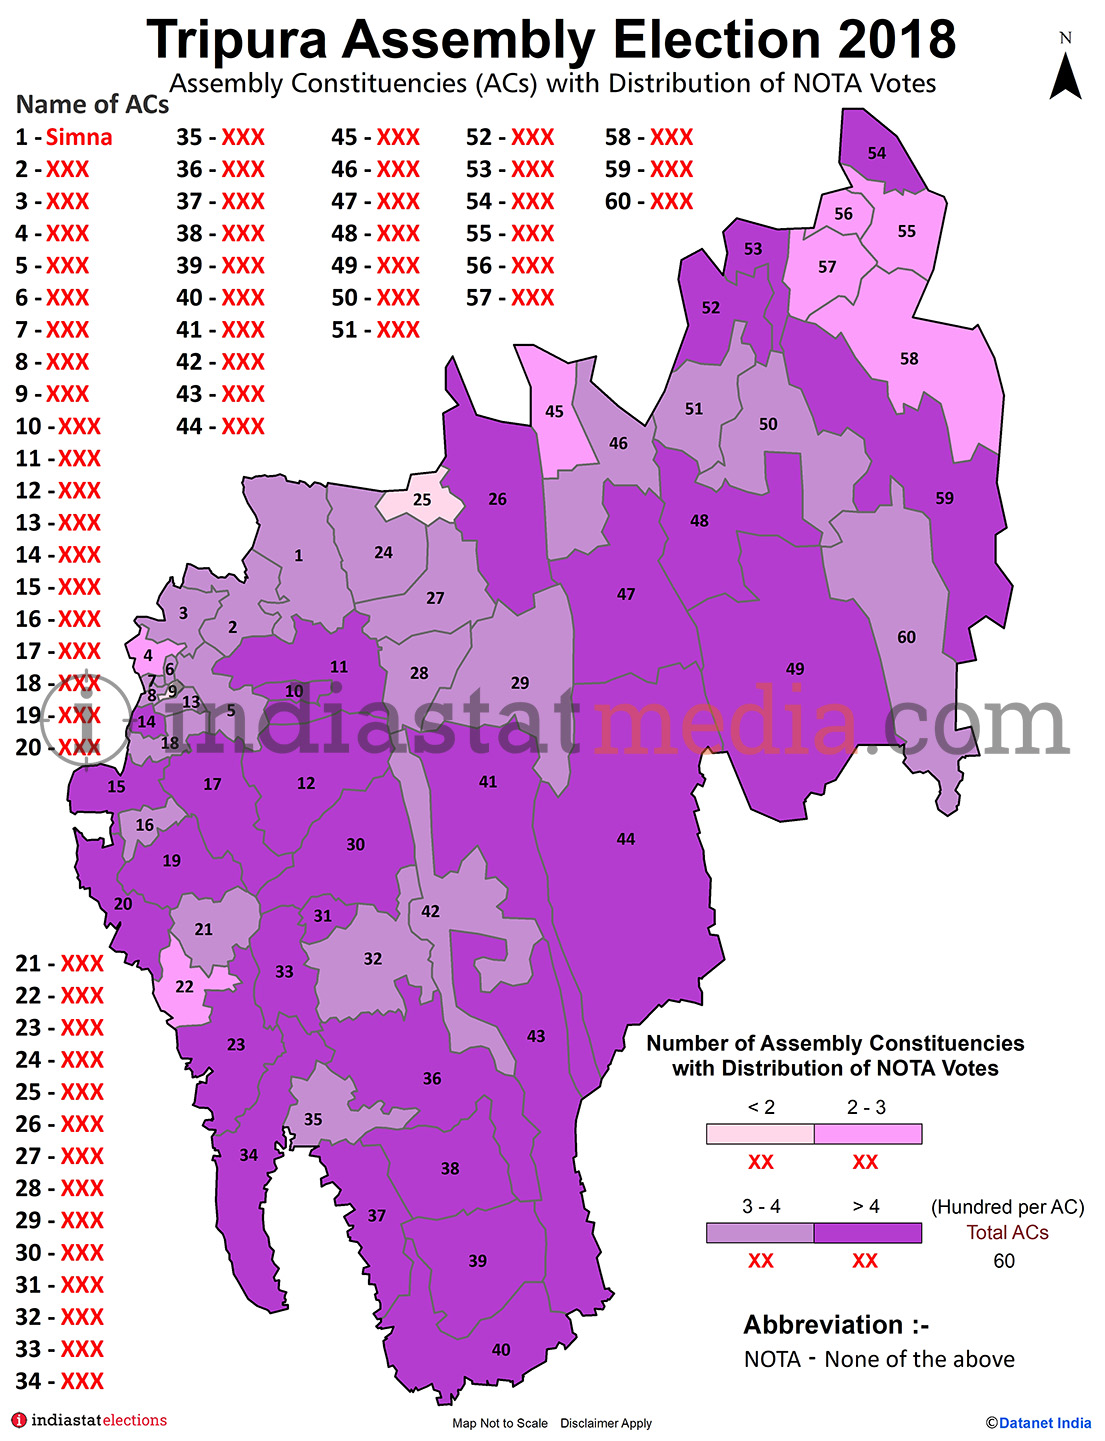 Distribution of NOTA Votes by Constituencies in Tripura (Assembly Election - 2018)